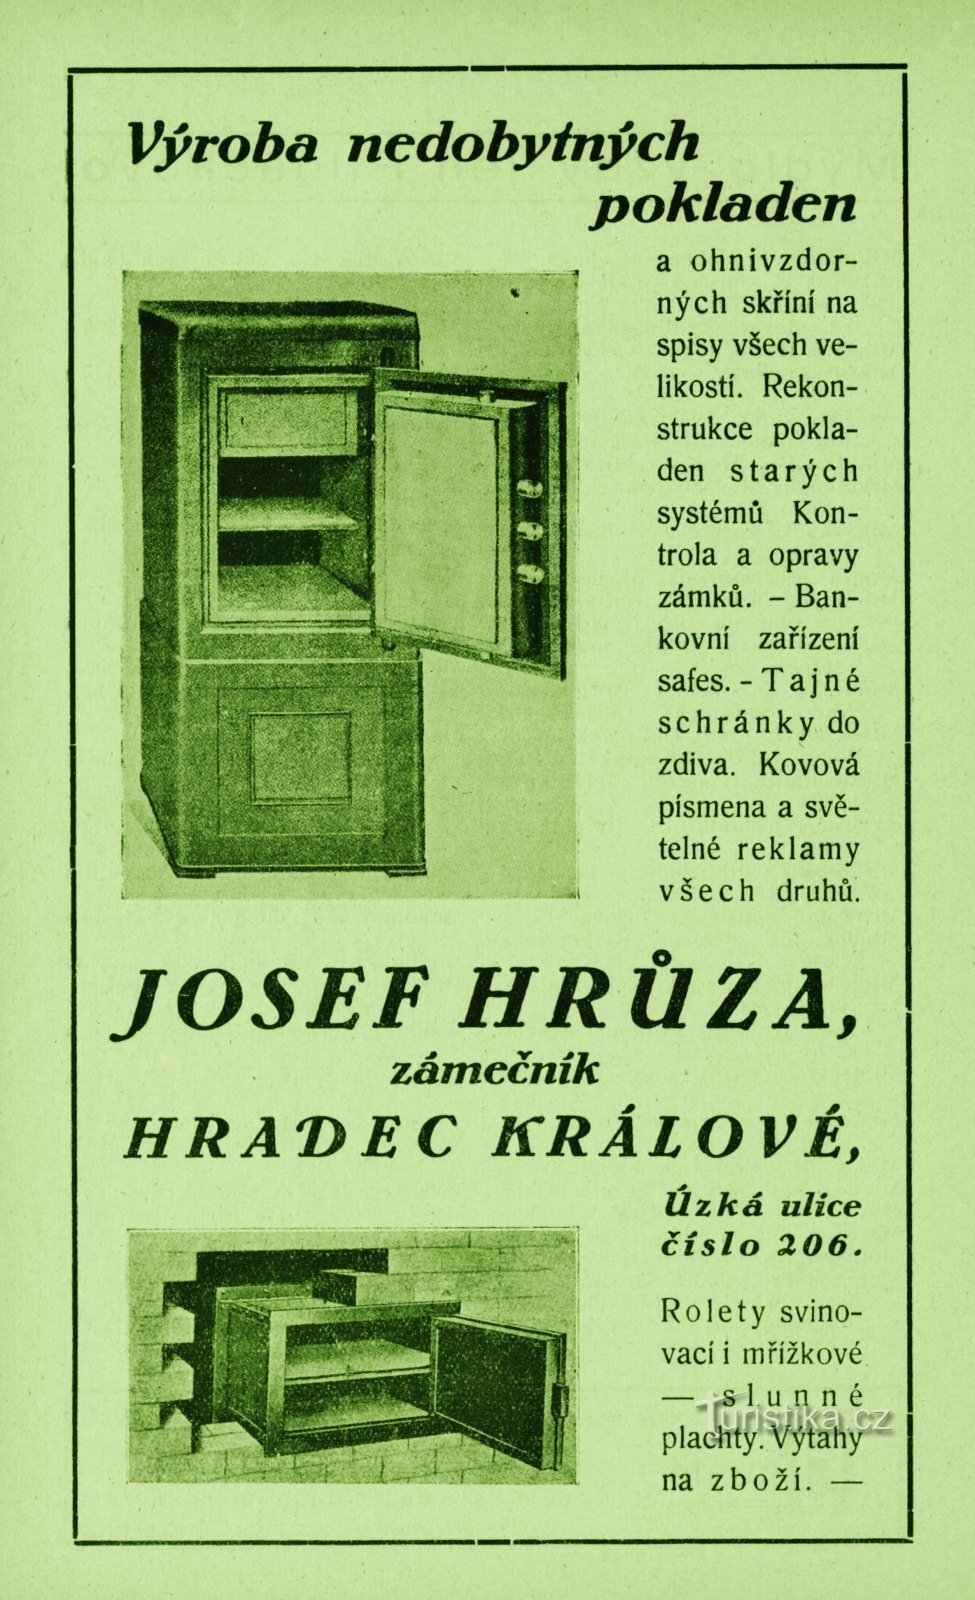 Contemporary advertisement of Josef Hrůza's locksmith workshop from 1931